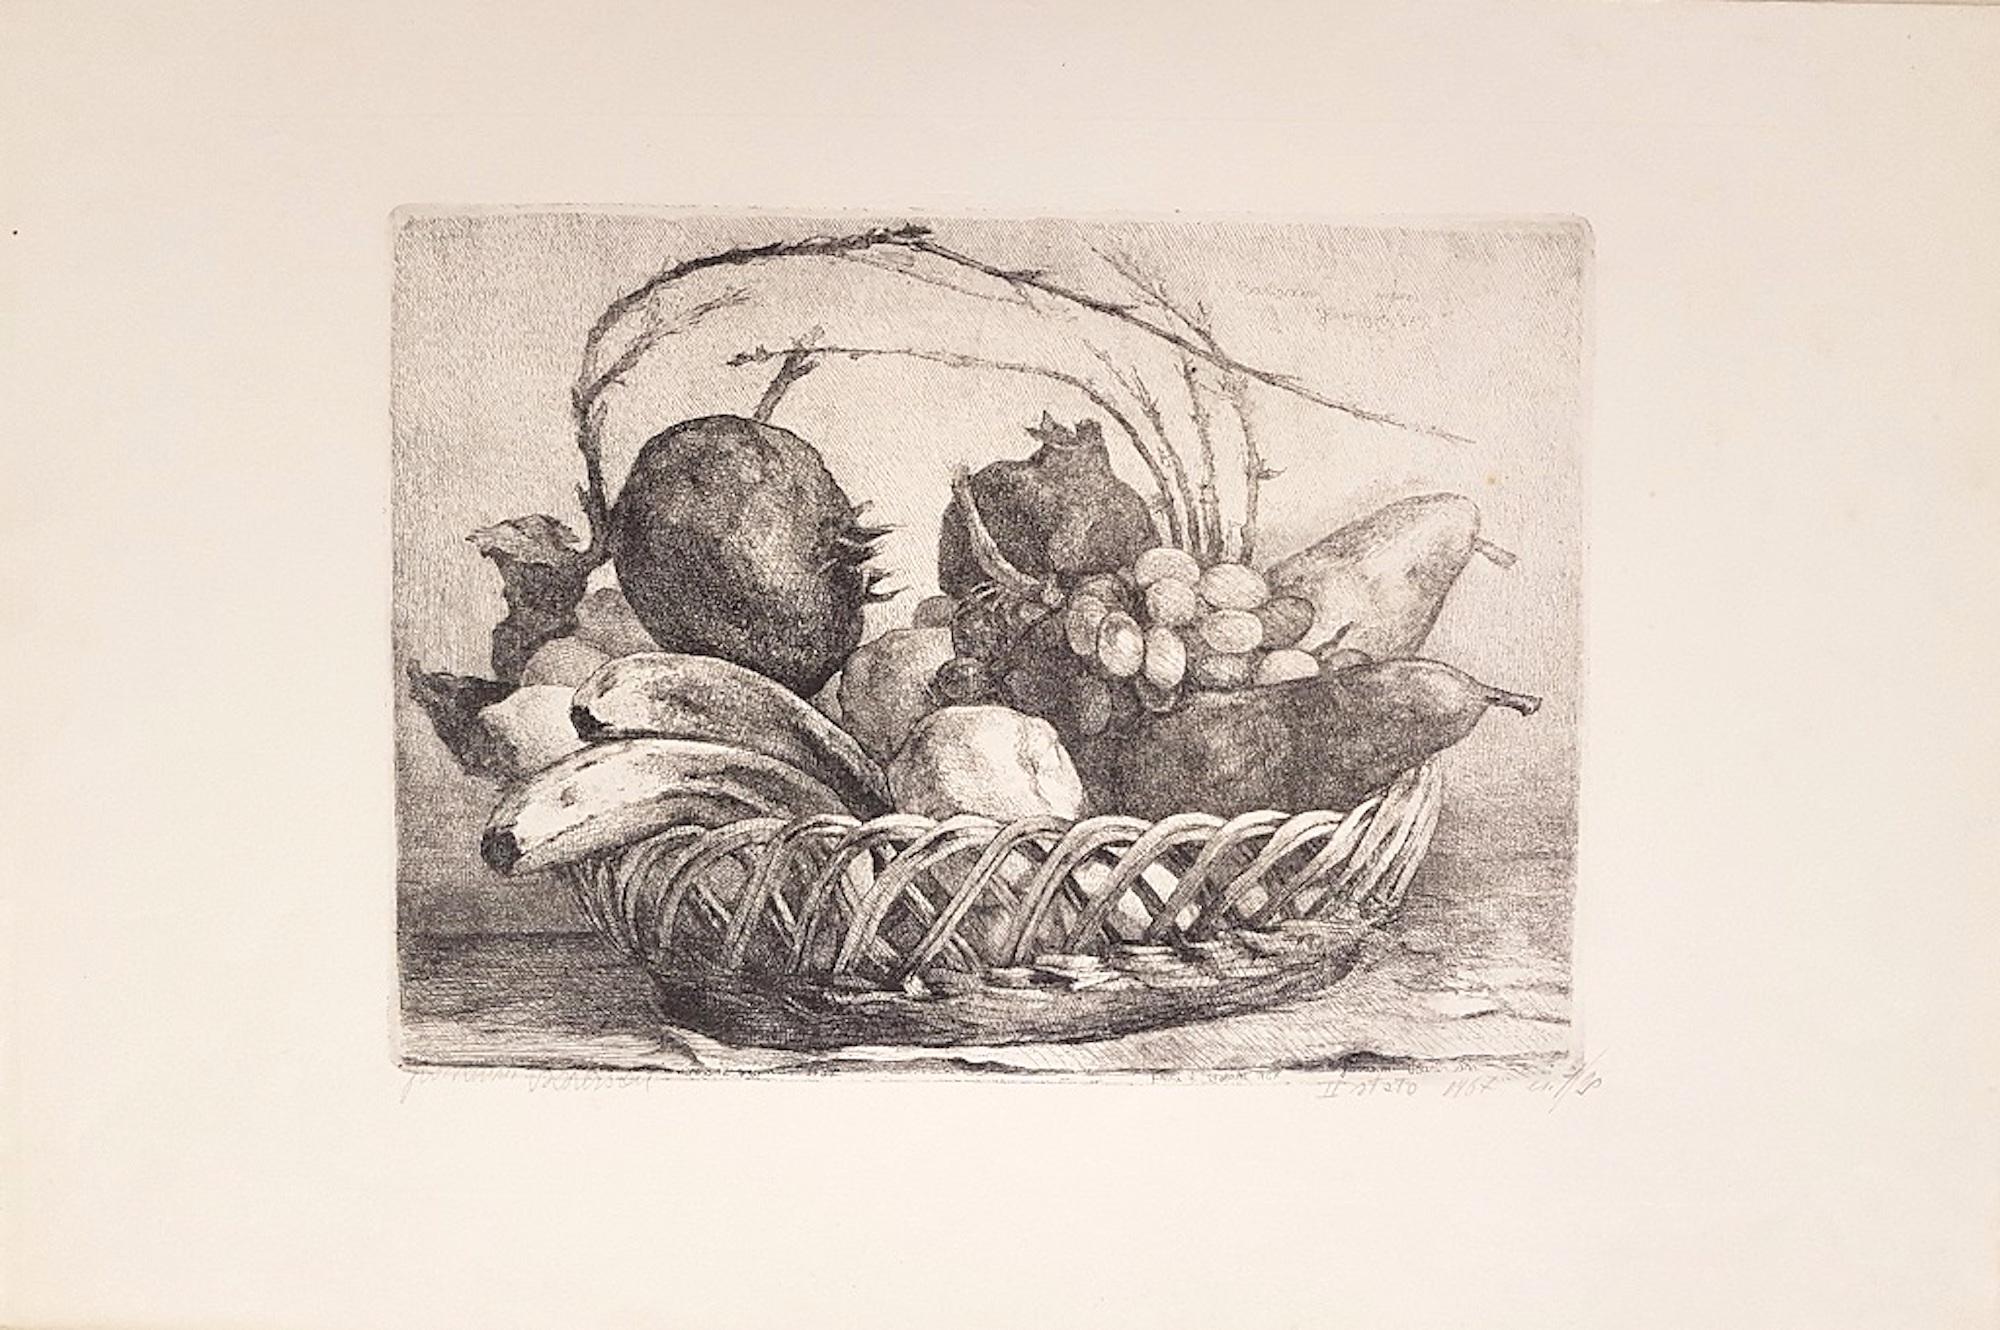 Etching, 1967, hand-signed with pencil on lower-left margin by the Italian artist, Giovanni Barbisan. Signed and dated on plate on lower margin at the center "finita il 21 aprile 1967//Giovanni Barbisan". Edition of 20 prints. Second state. In very